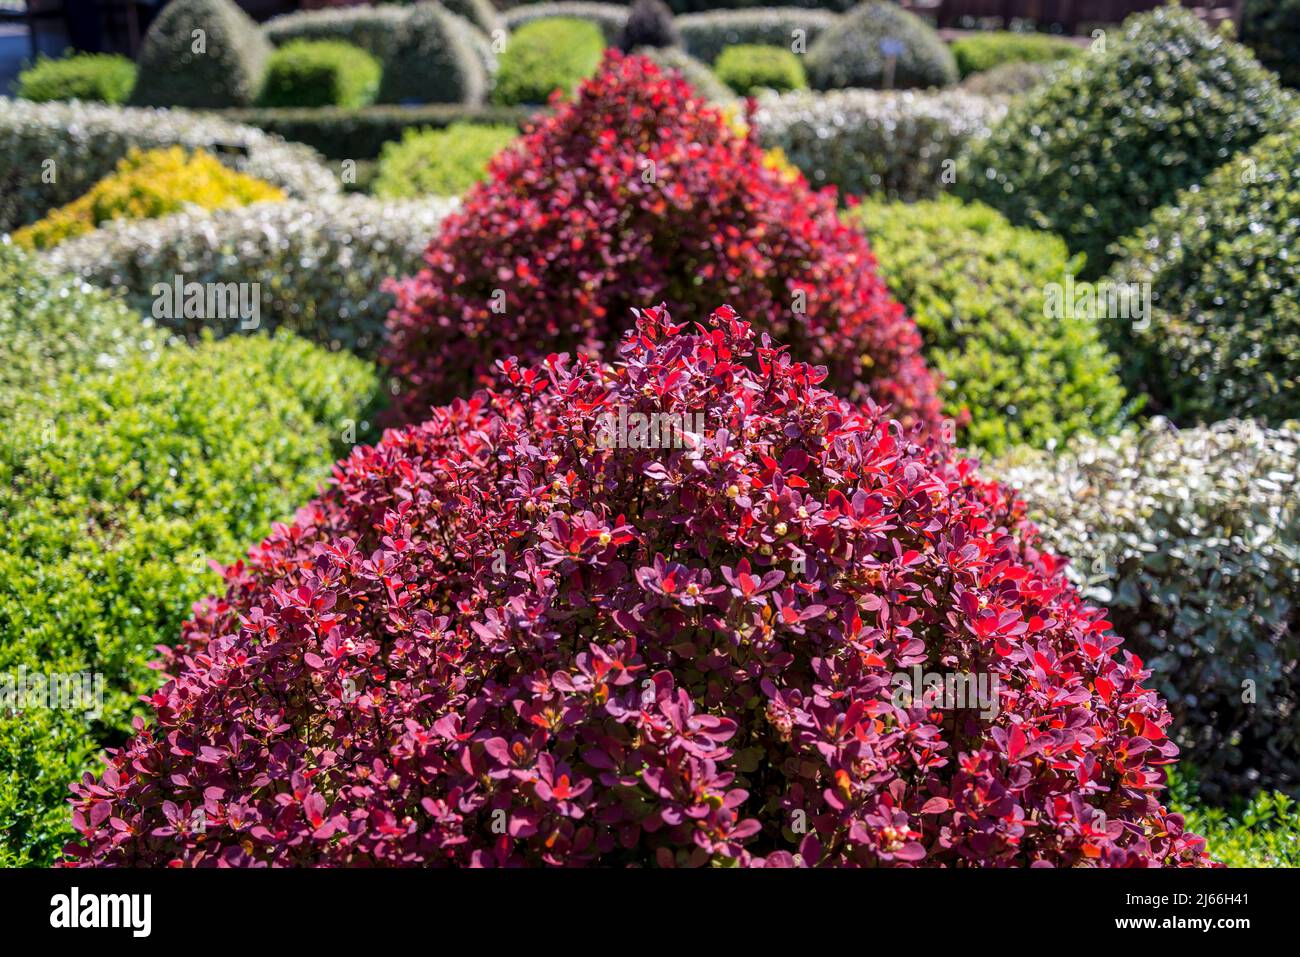 The knot garden with topiary shrubs and red leaved Berberis thunbergii 'Orange Rocket' in the Walled Garden at Wisley RHS Garden, Surrey, England, UK Stock Photo